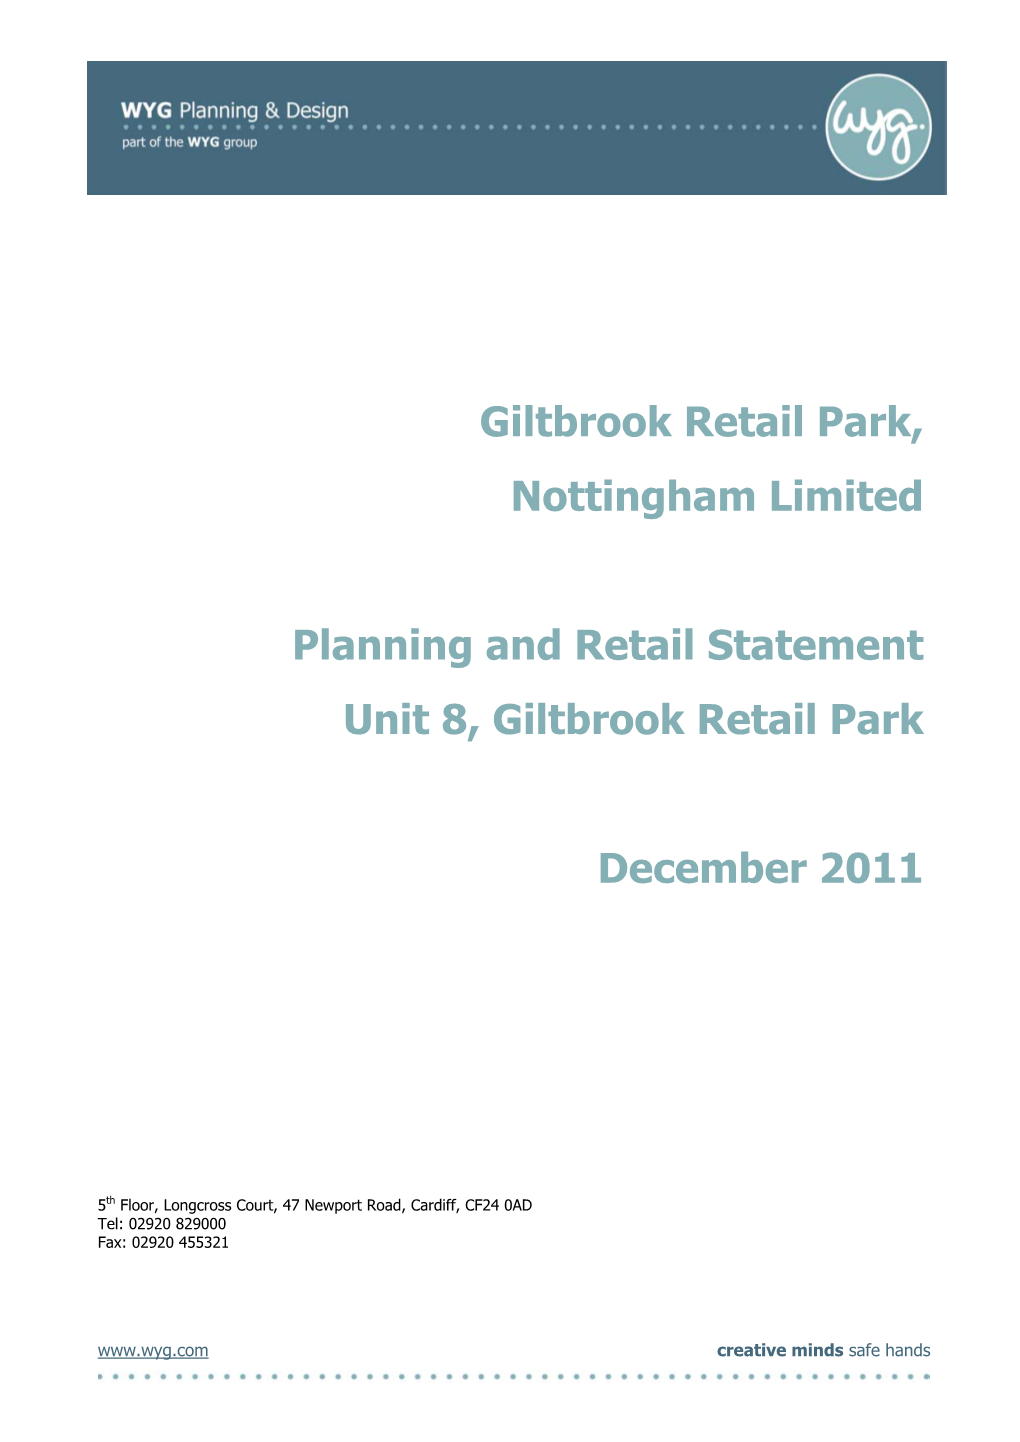 Giltbrook Retail Park, Nottingham Limited Planning and Retail